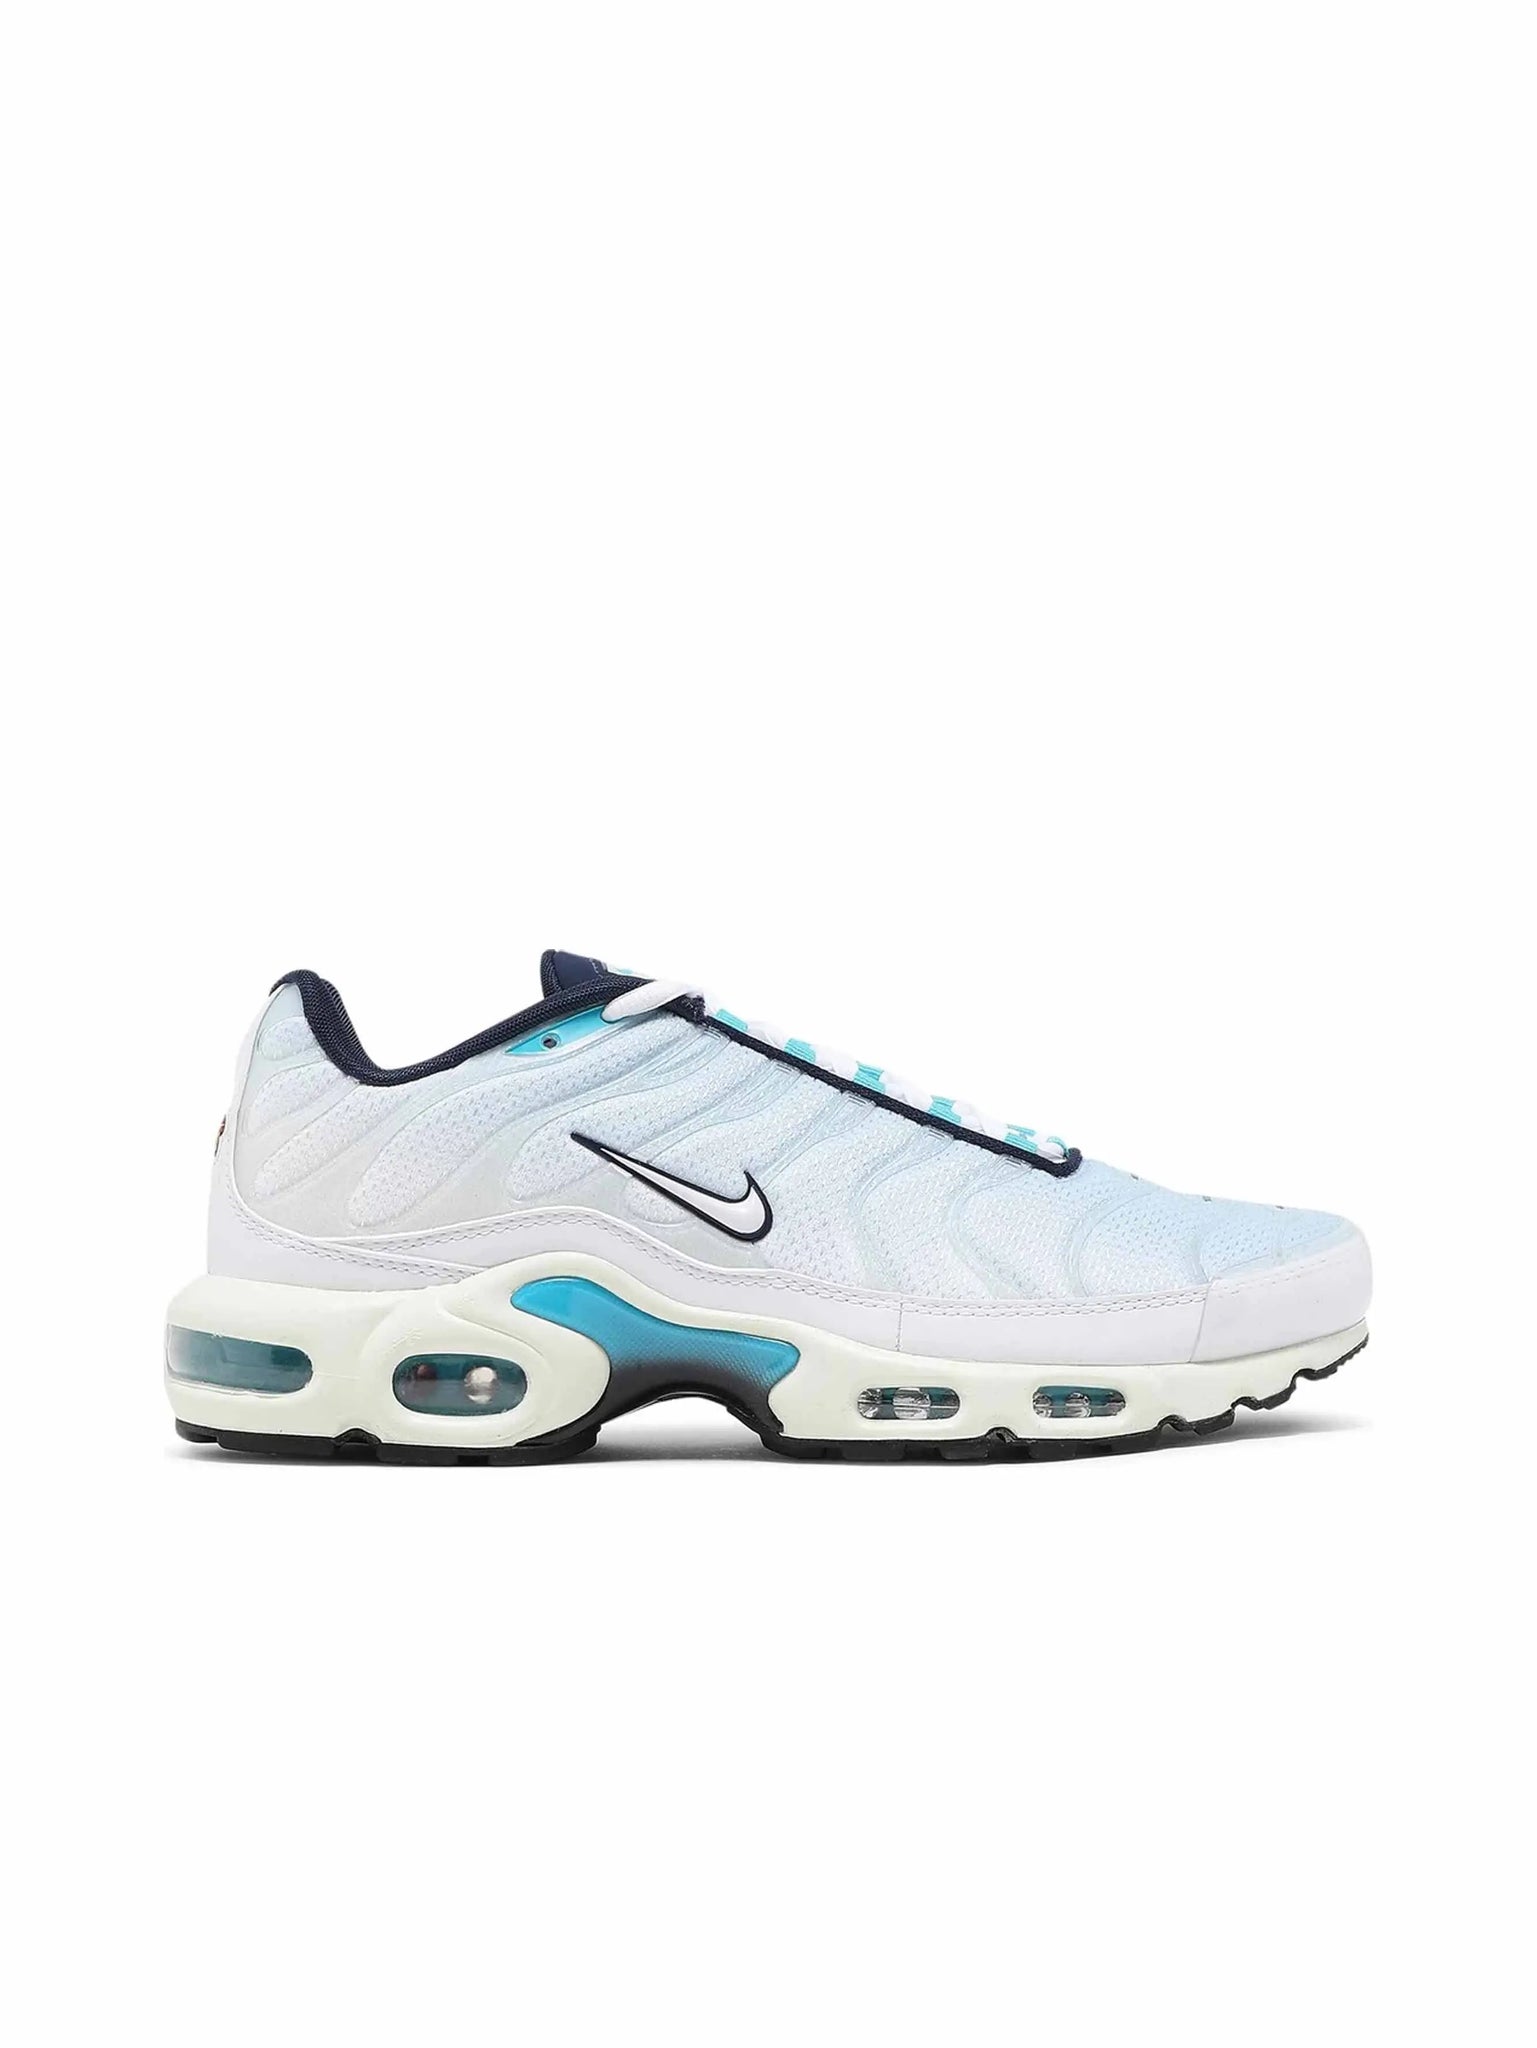 Nike Air Max Plus Psychic Blue White in Auckland, New Zealand - Shop name